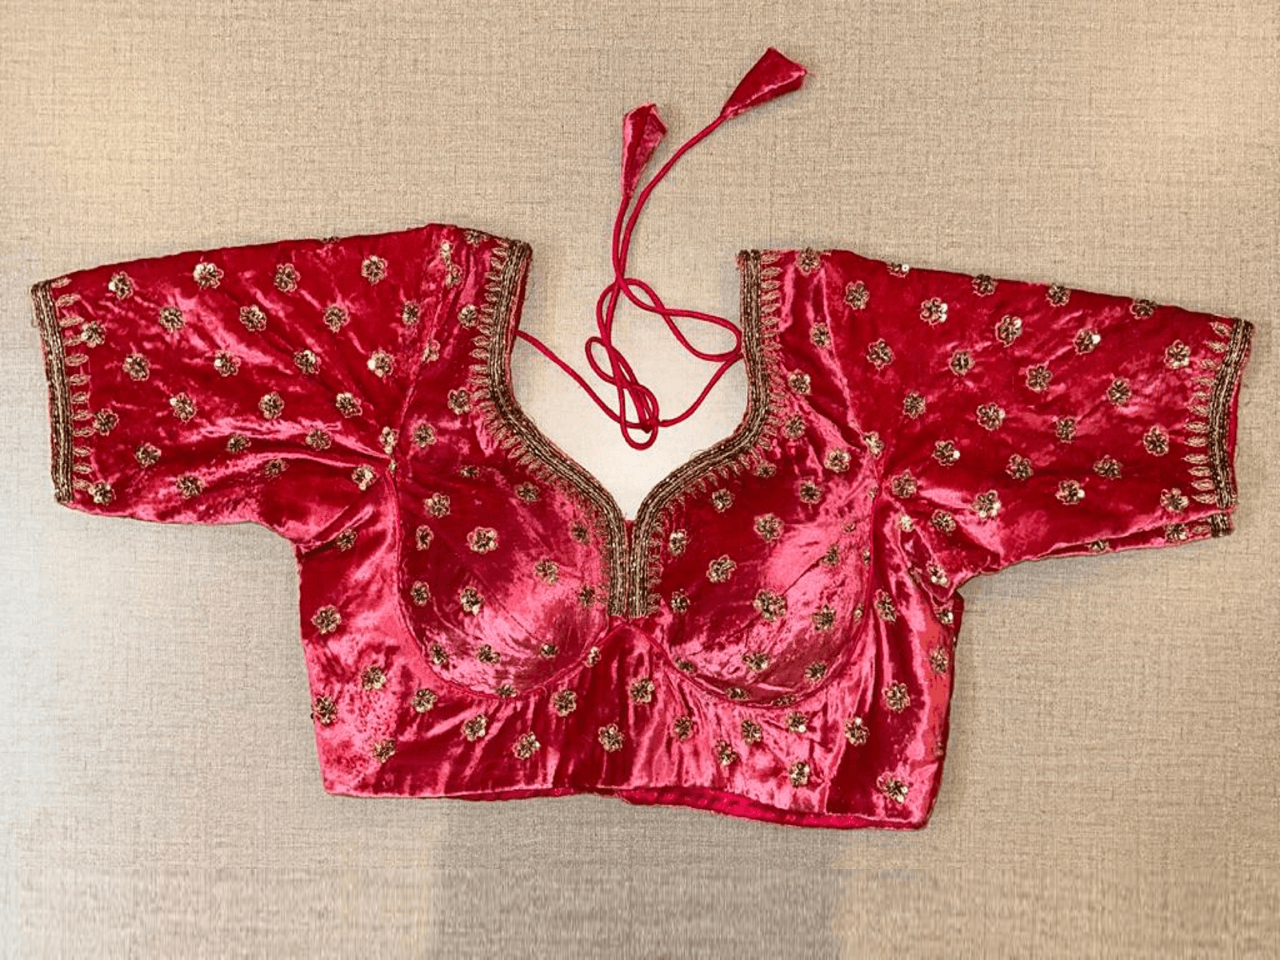 Buy beautiful dark pink embroidered velvet choli cut saree blouse online in USA. Elevate your saree style with exquisite readymade saree blouses, embroidered saree blouses, Banarasi saree blouse, designer saree blouse, choli-cut blouses, corset blouses from Pure Elegance Indian clothing store in USA.-full view